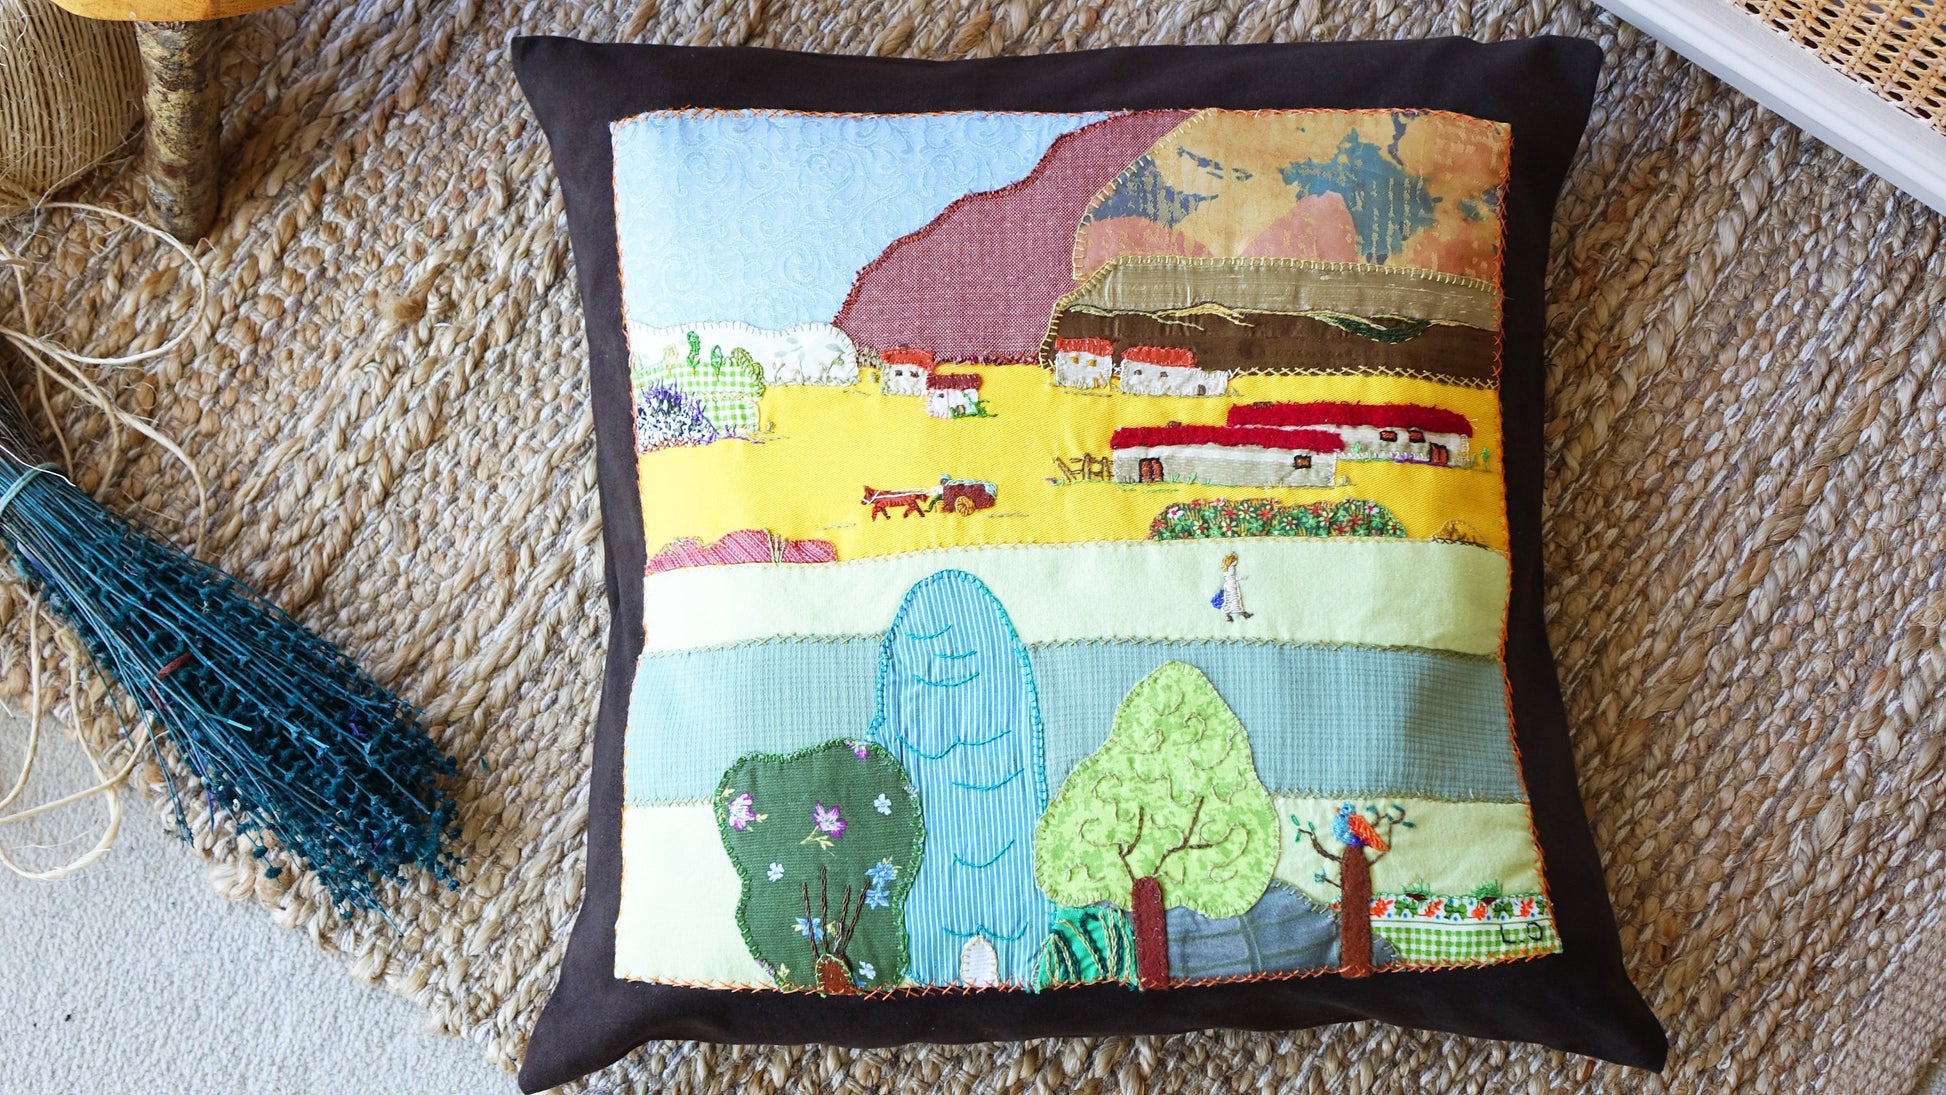 Handmade Quilted, Patchwork Cushion - Verna Artisan Works